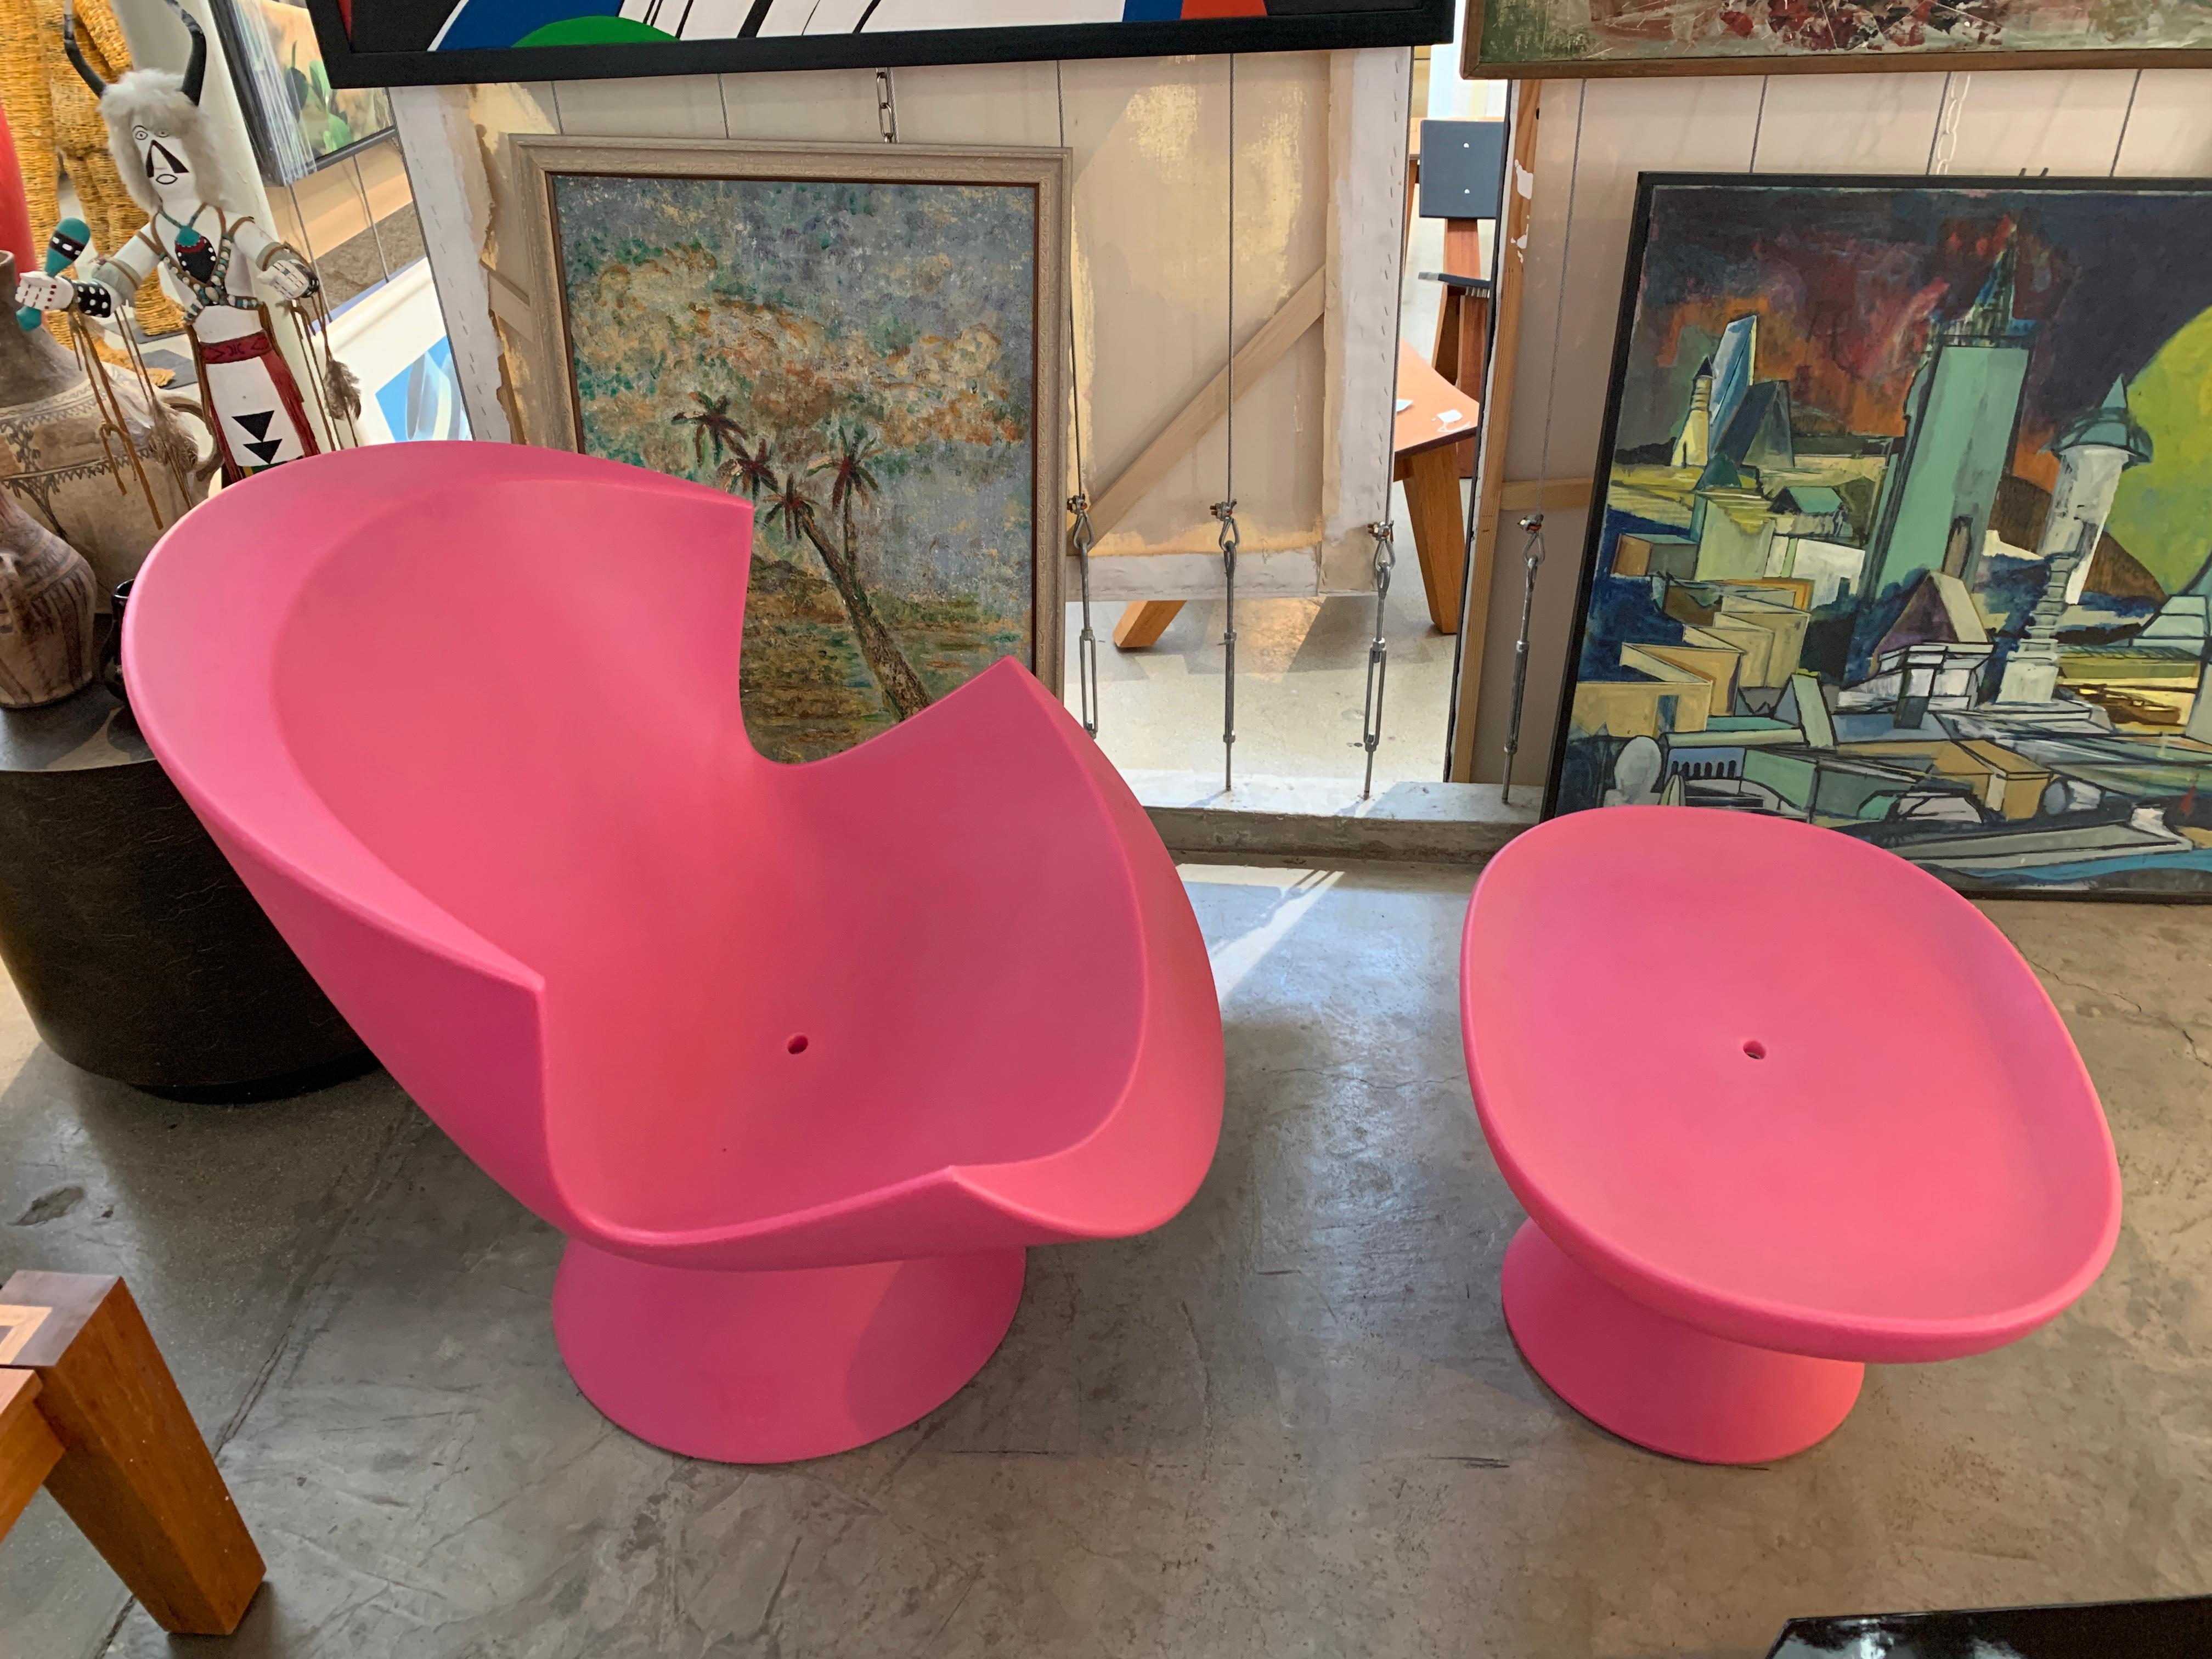 Karim Rashid designed this Kite chair and Mini Kite ottoman for Label of the Netherlands in 2004. They were sold I believe through DWR and are no longer in production. As Karim Rashid's fame has grown internationally these chairs have become sought